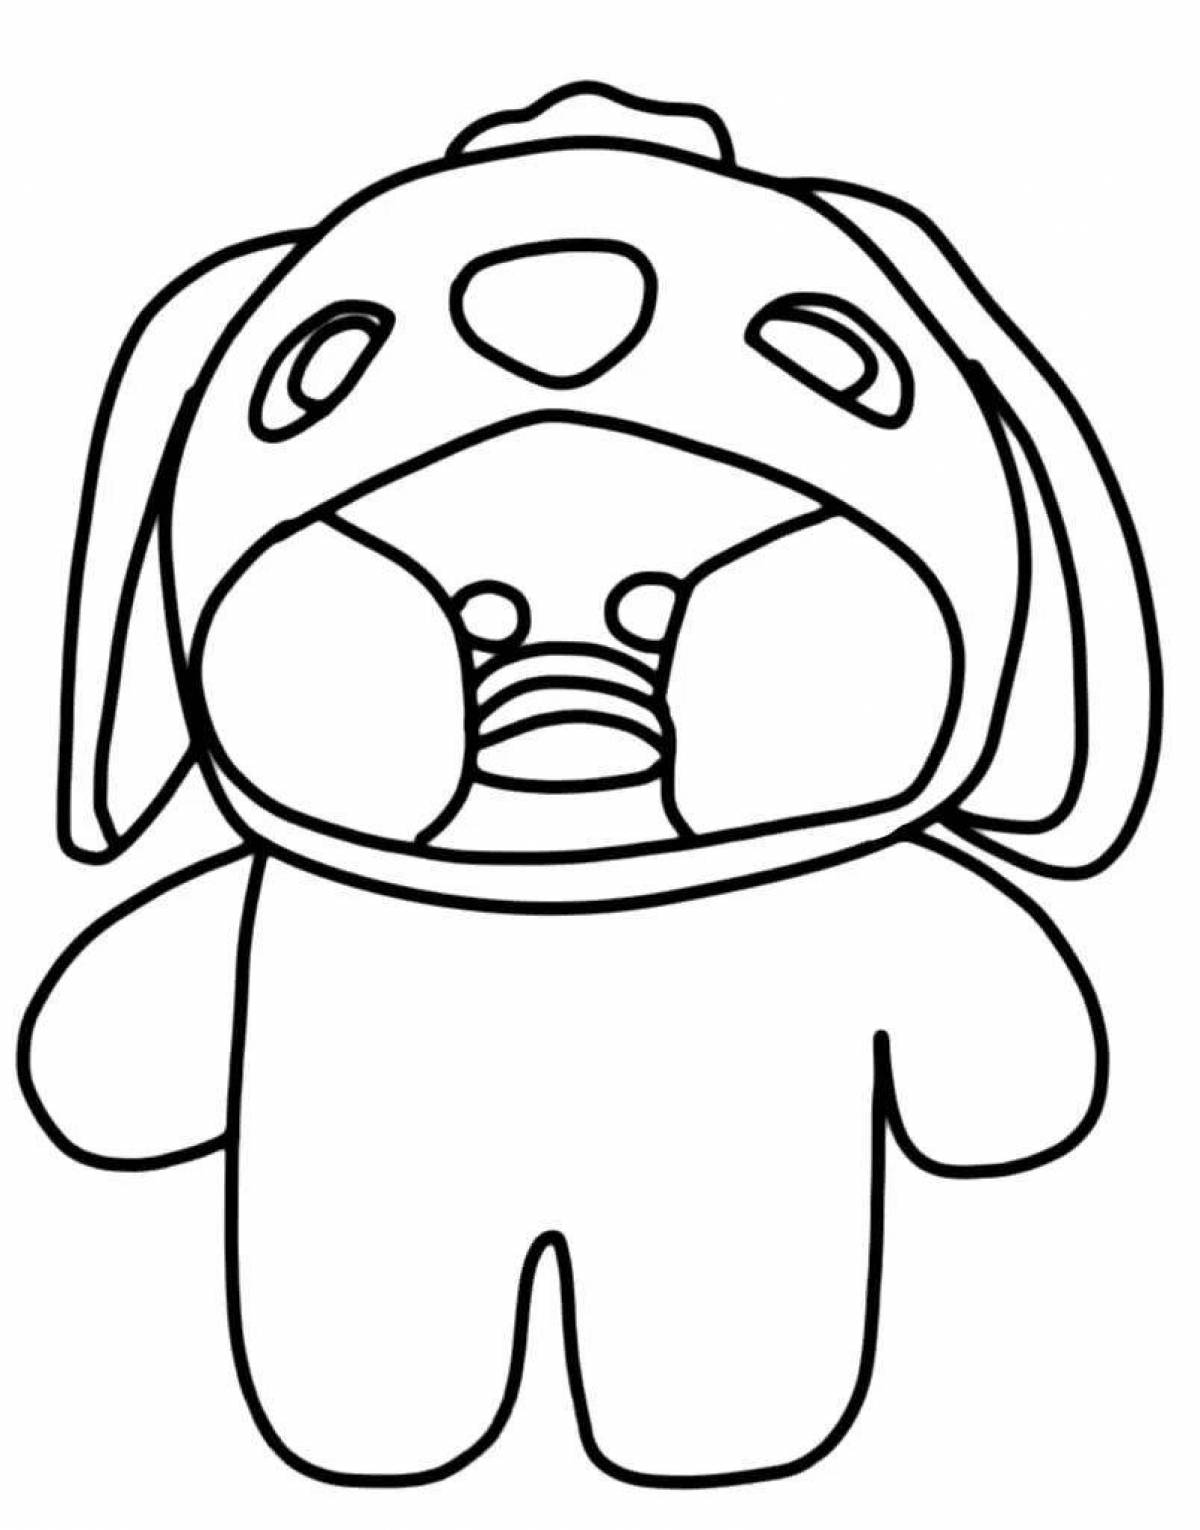 Lafanfan colored live duck coloring page